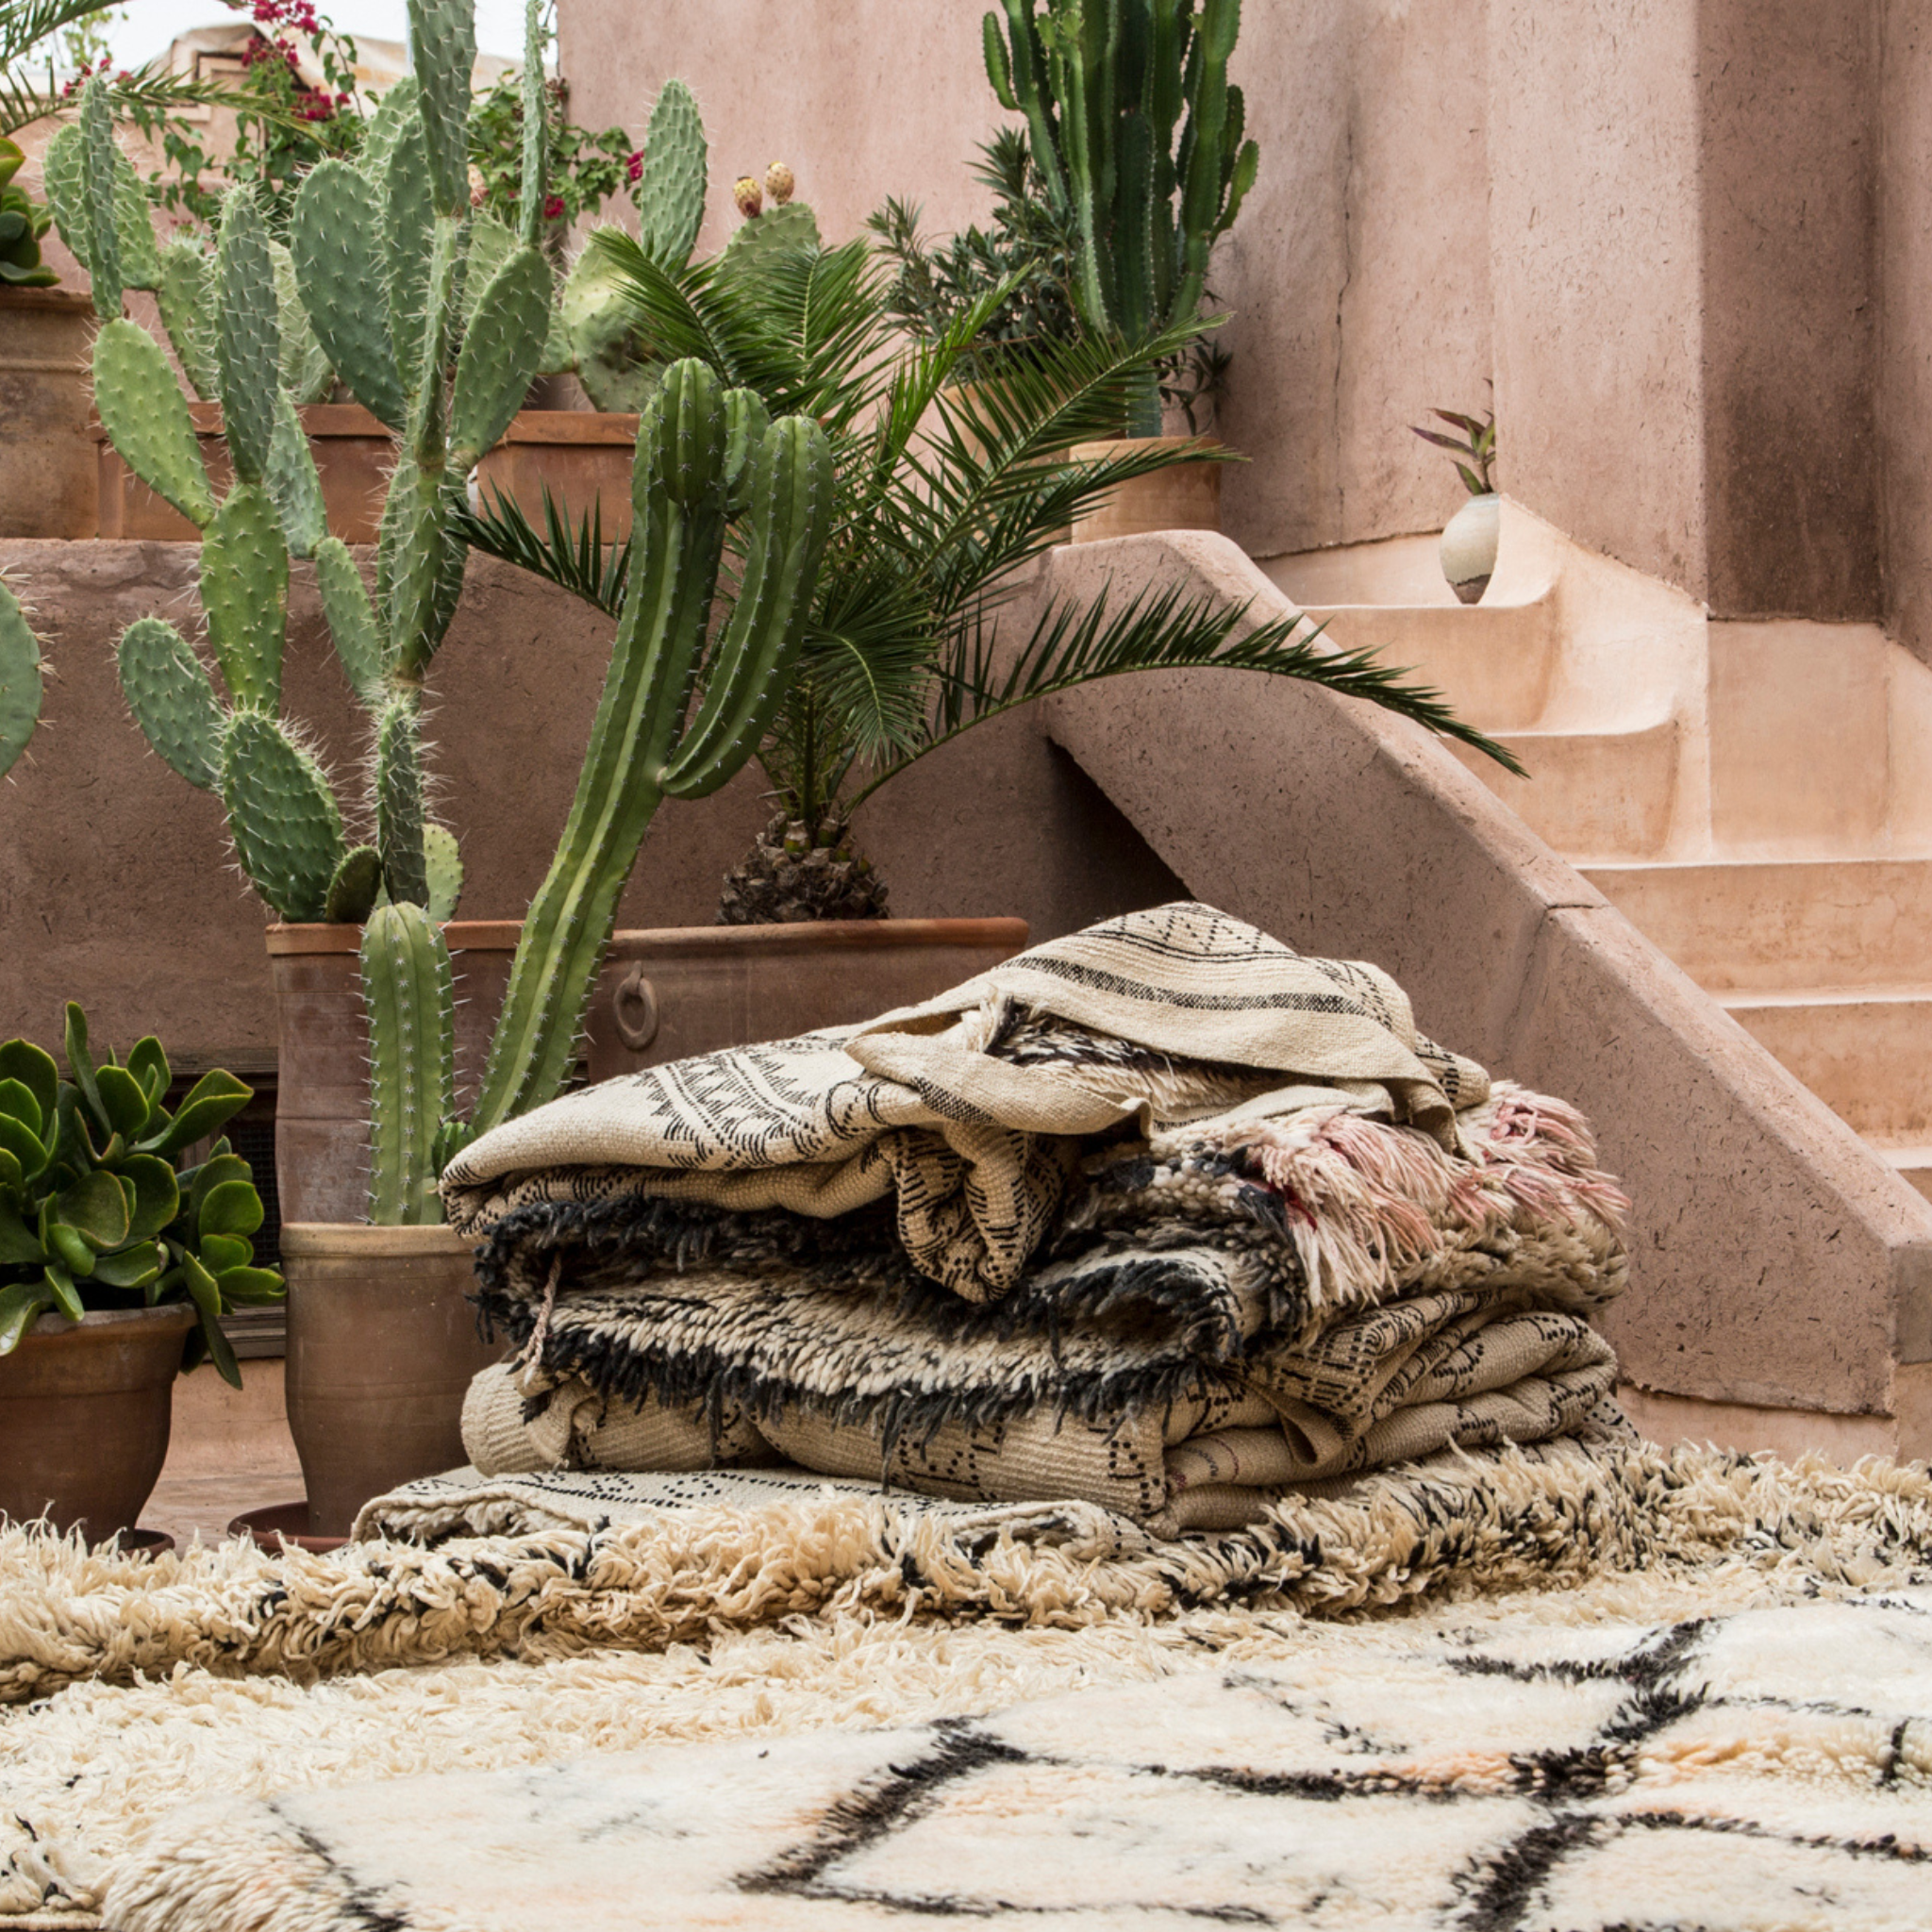 A pile of authentic vintage Beni Ourain rugs with cactus pots in the background